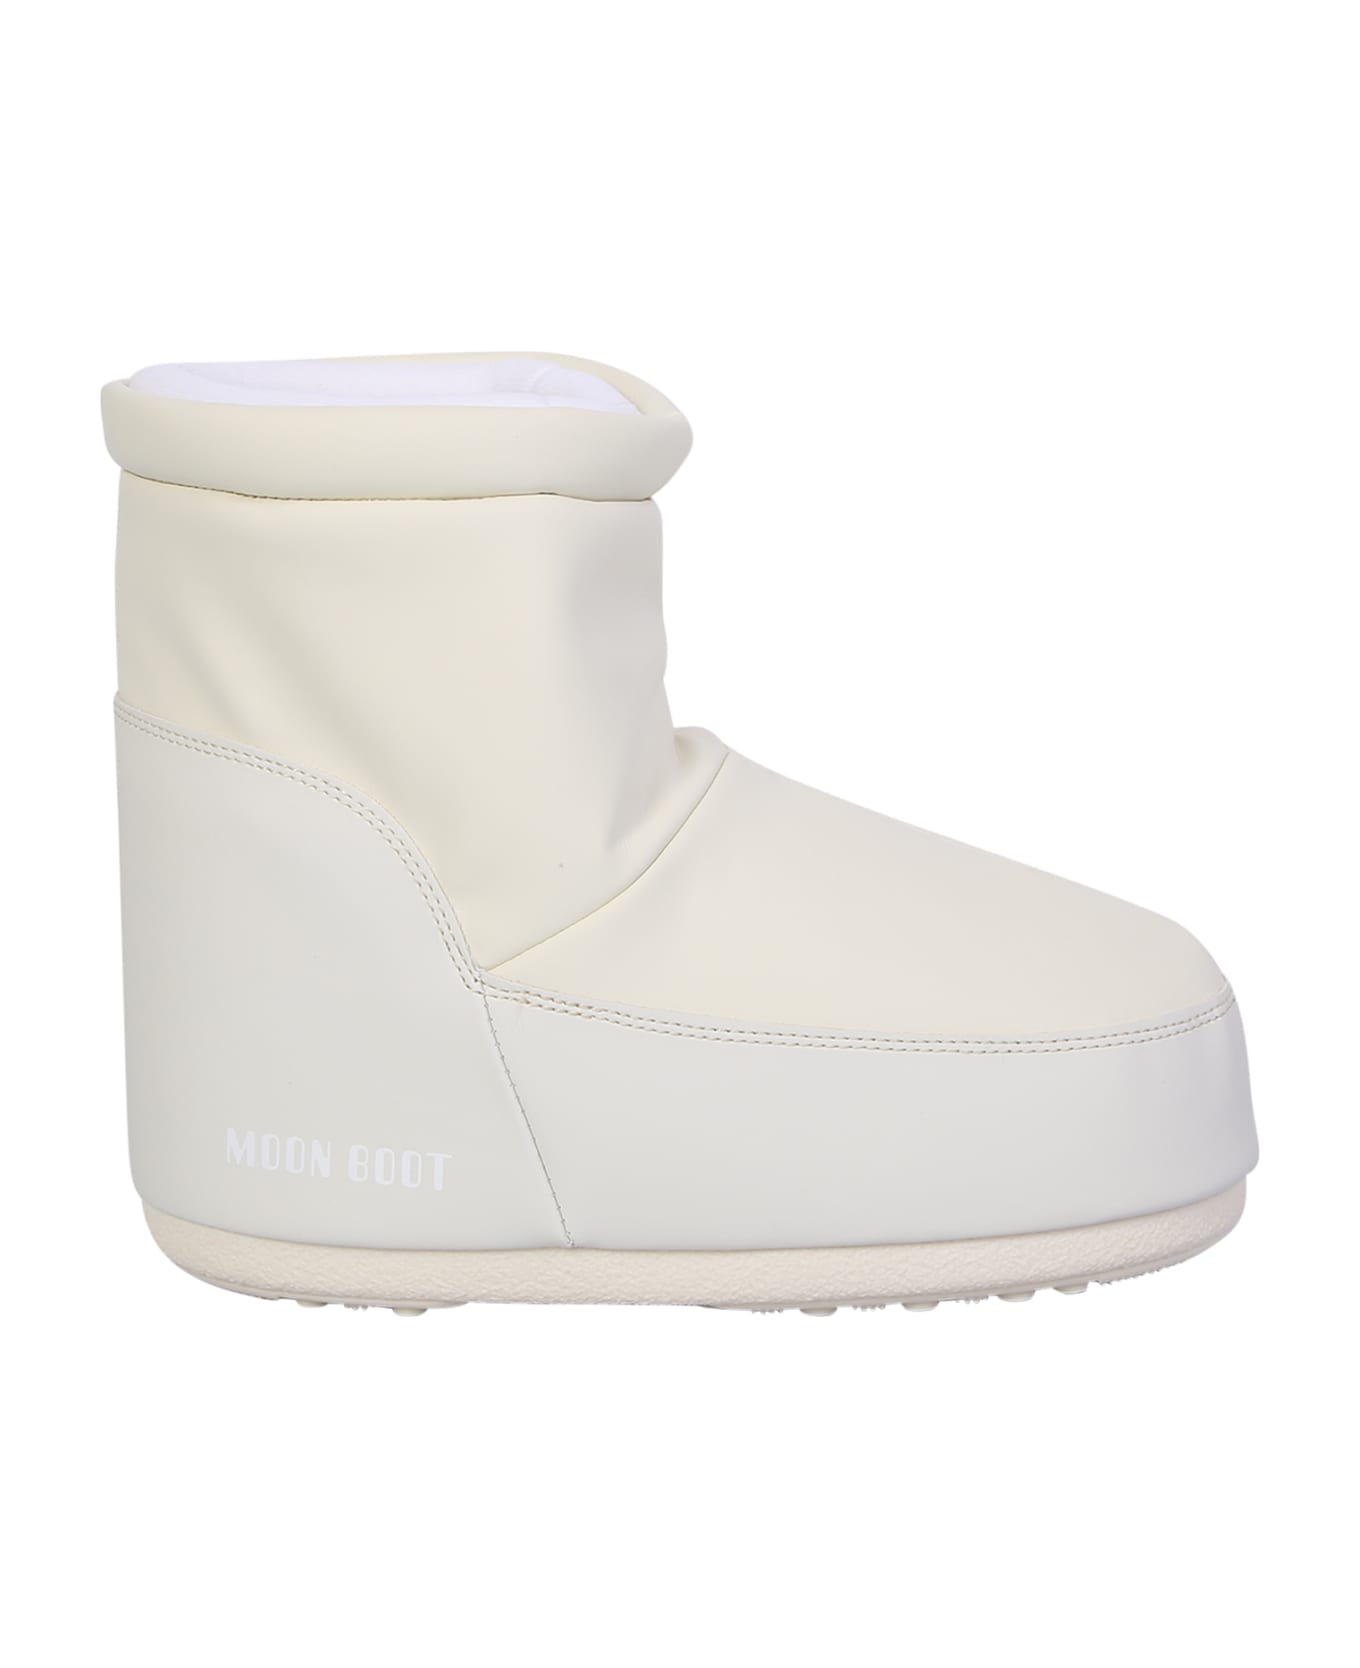 Moon Boot Cream Icon Low Ankle Boots - White ブーツ